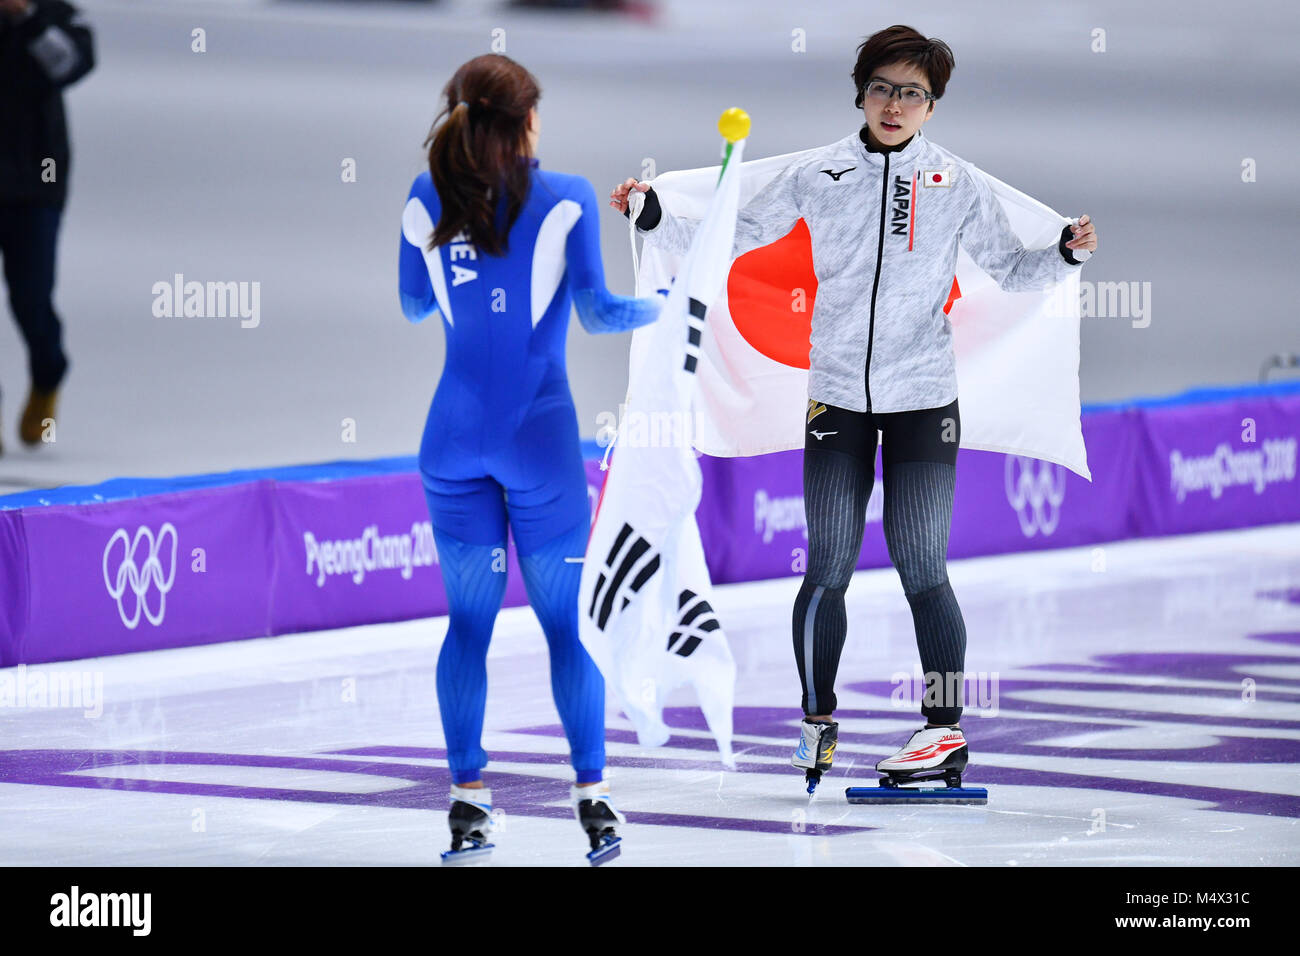 L-R) Lee Sang-Hwa (KOR), Nao Kodaira (JPN), FEBRUARY 18, 2018 - Speed  Skating : Women's 500m at Gangneung Oval during the PyeongChang 2018  Olympic Winter Games in Gangneung, South Korea. (Photo by